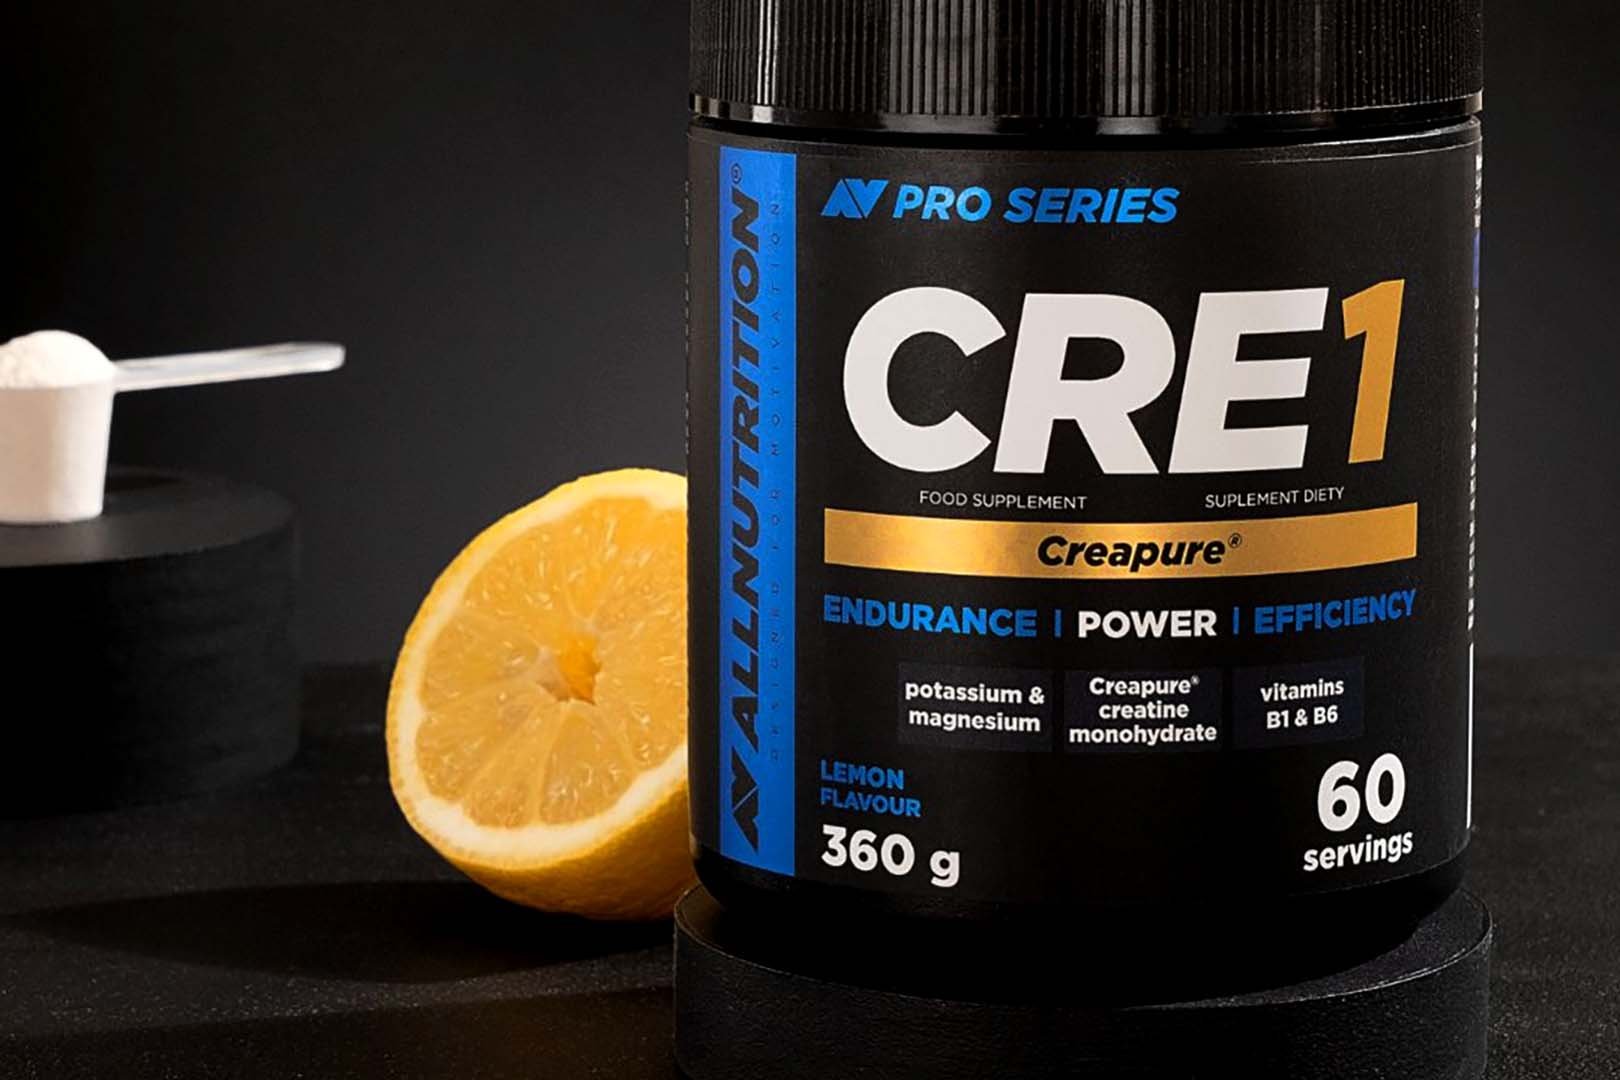 All Nutrition Cre1